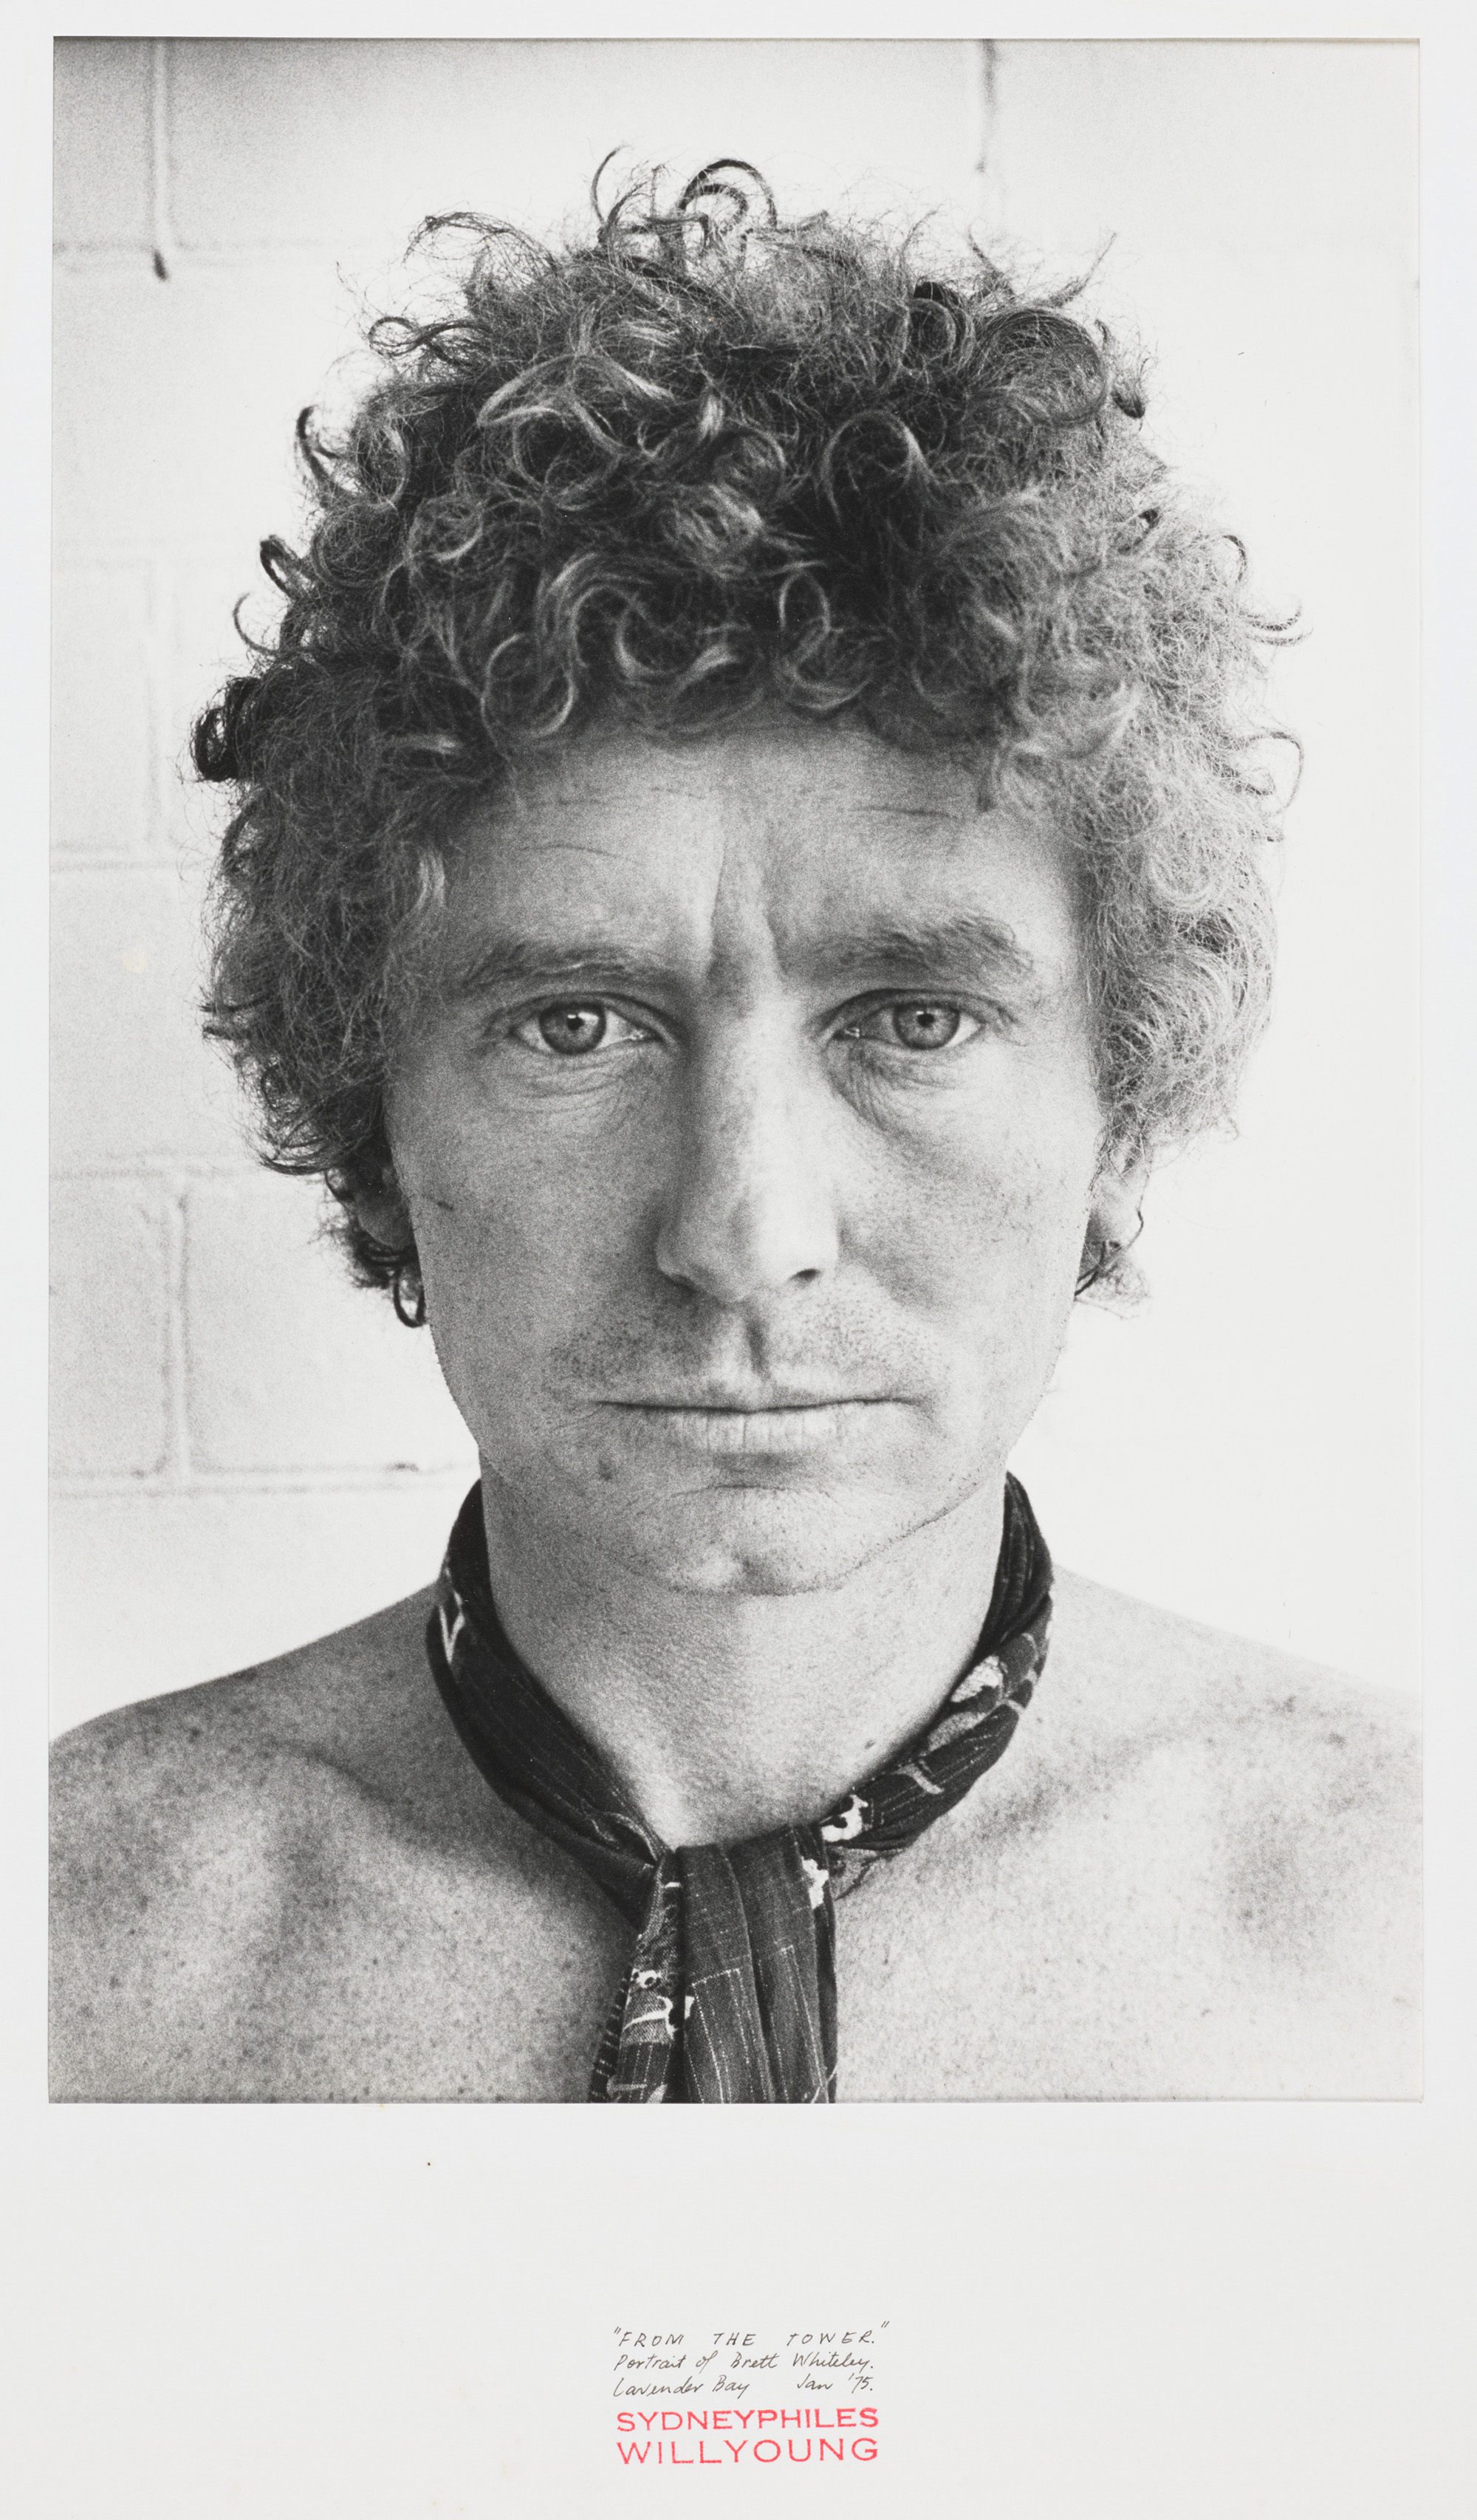 Black and white portrait of a man, shirtless, wearing a scarf tied around his neck.